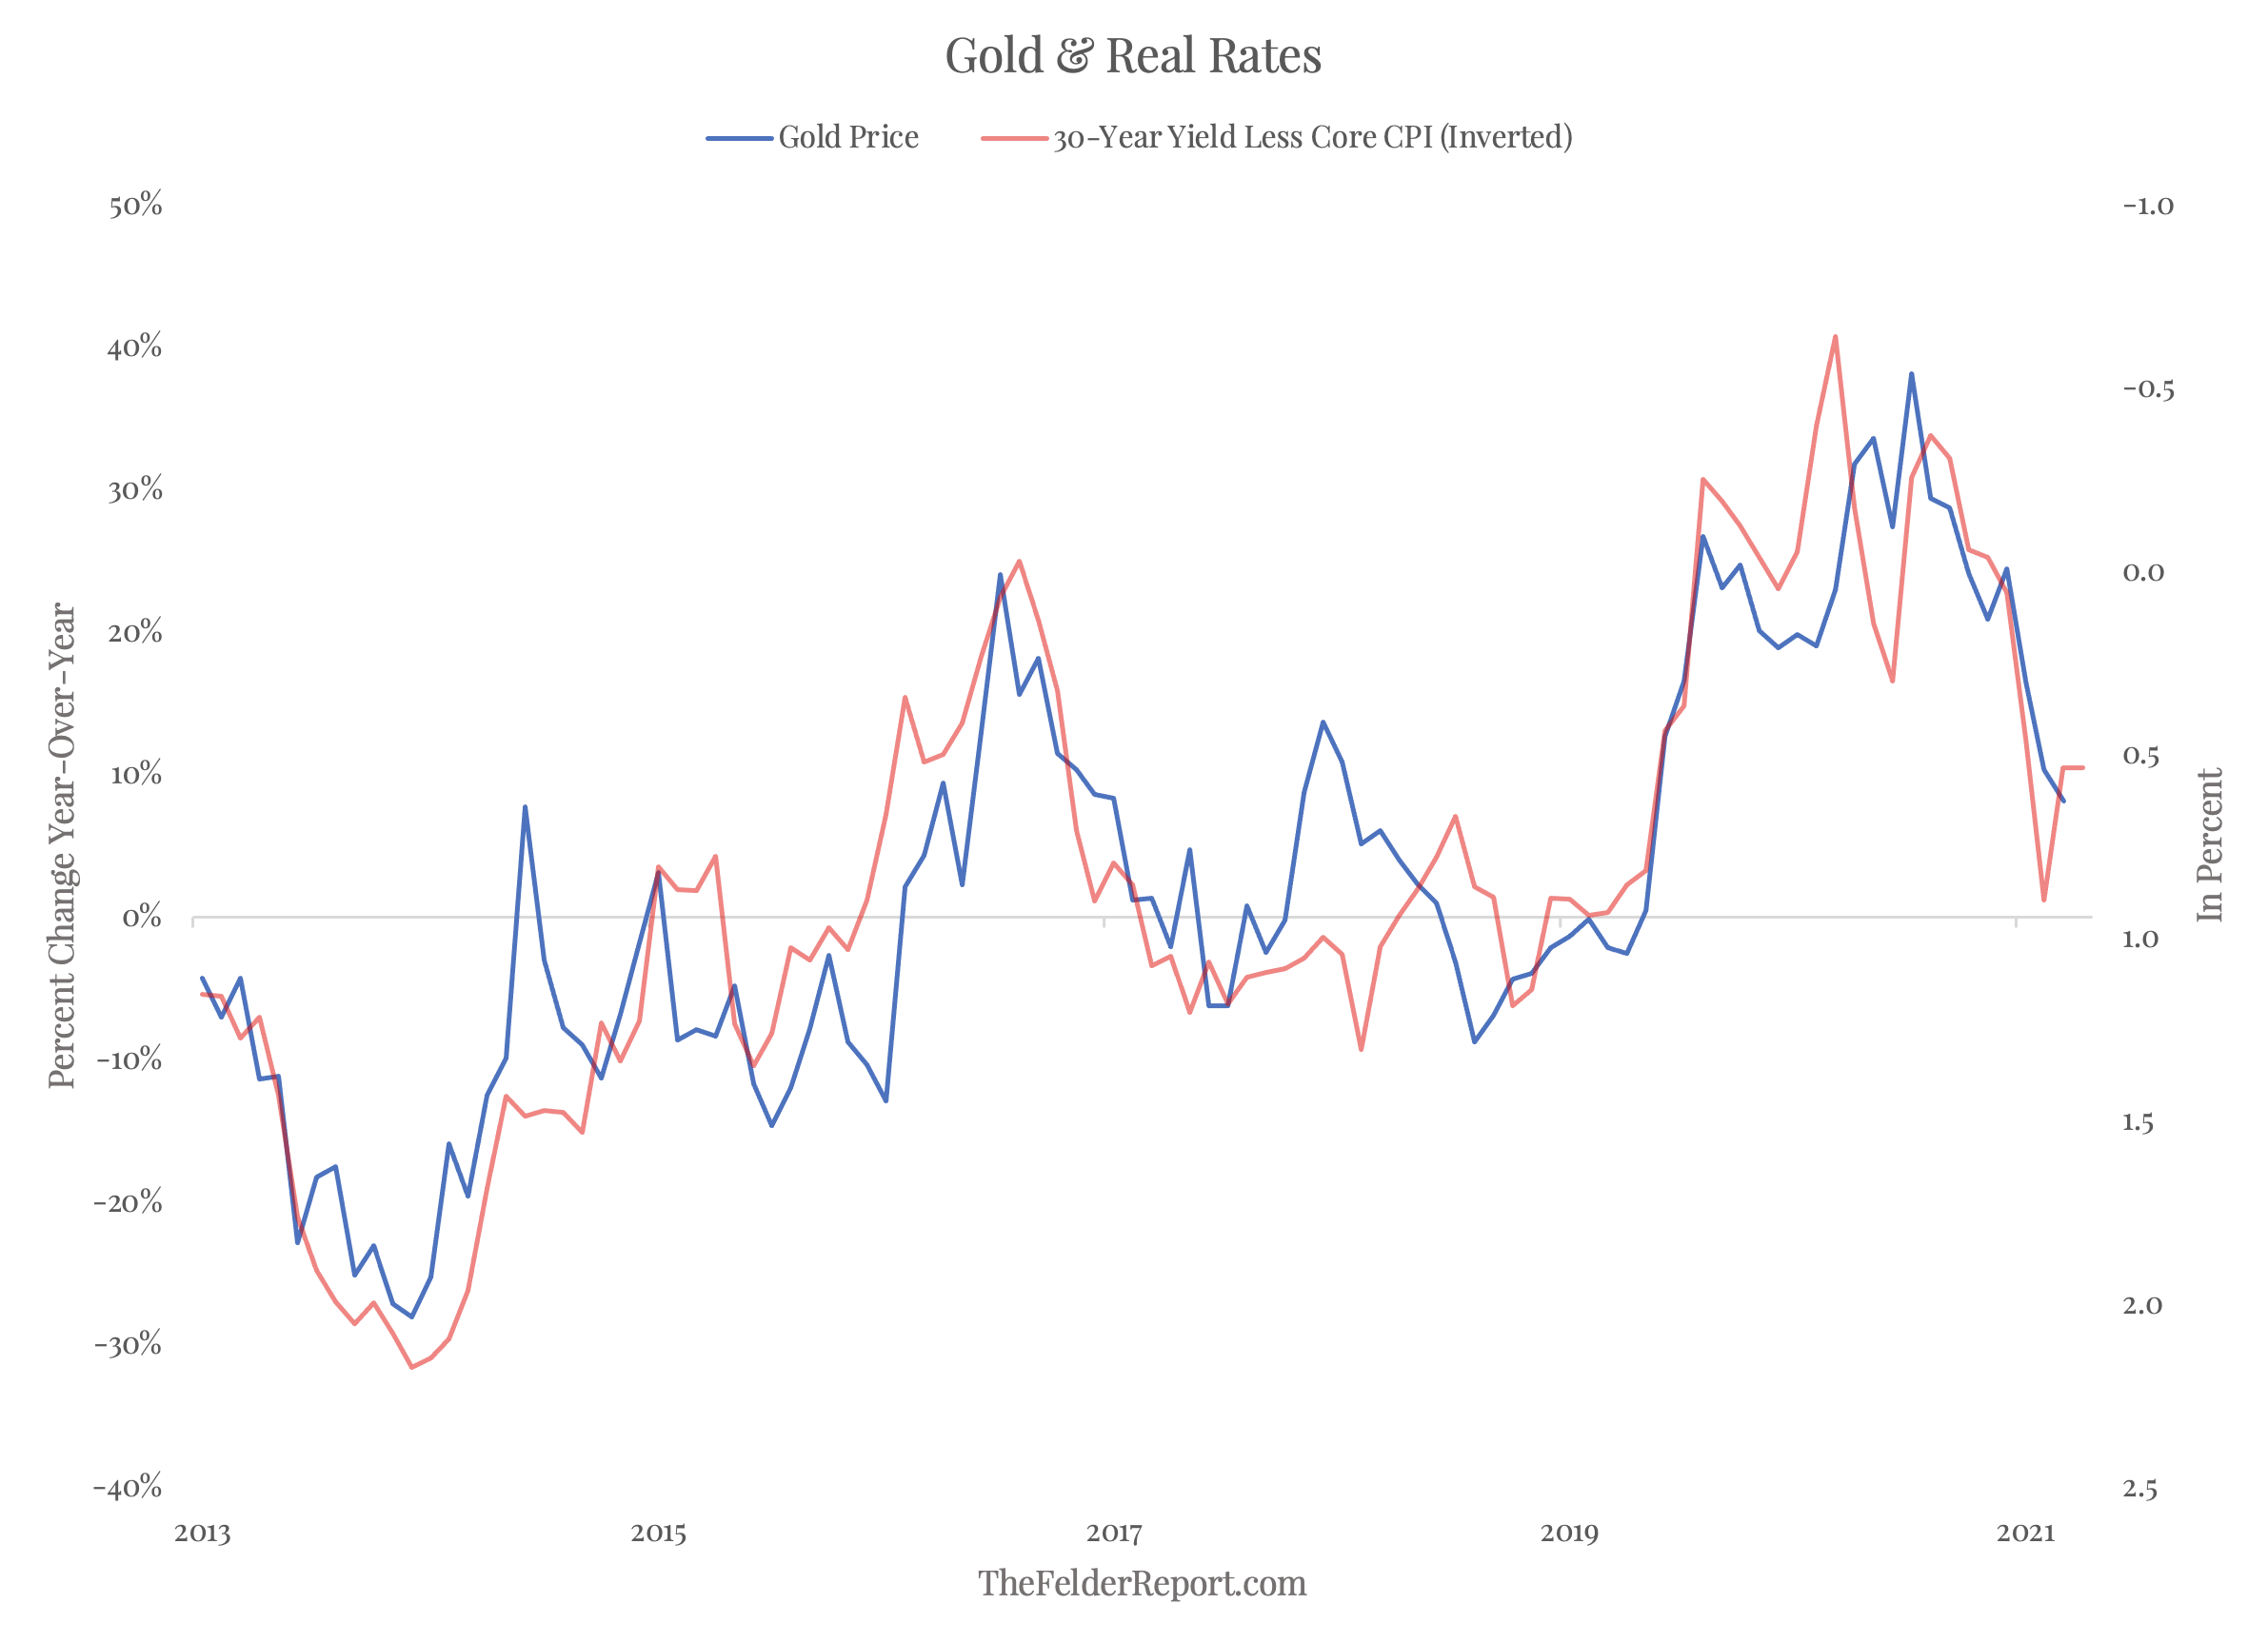 Gold & Real Rates Chart